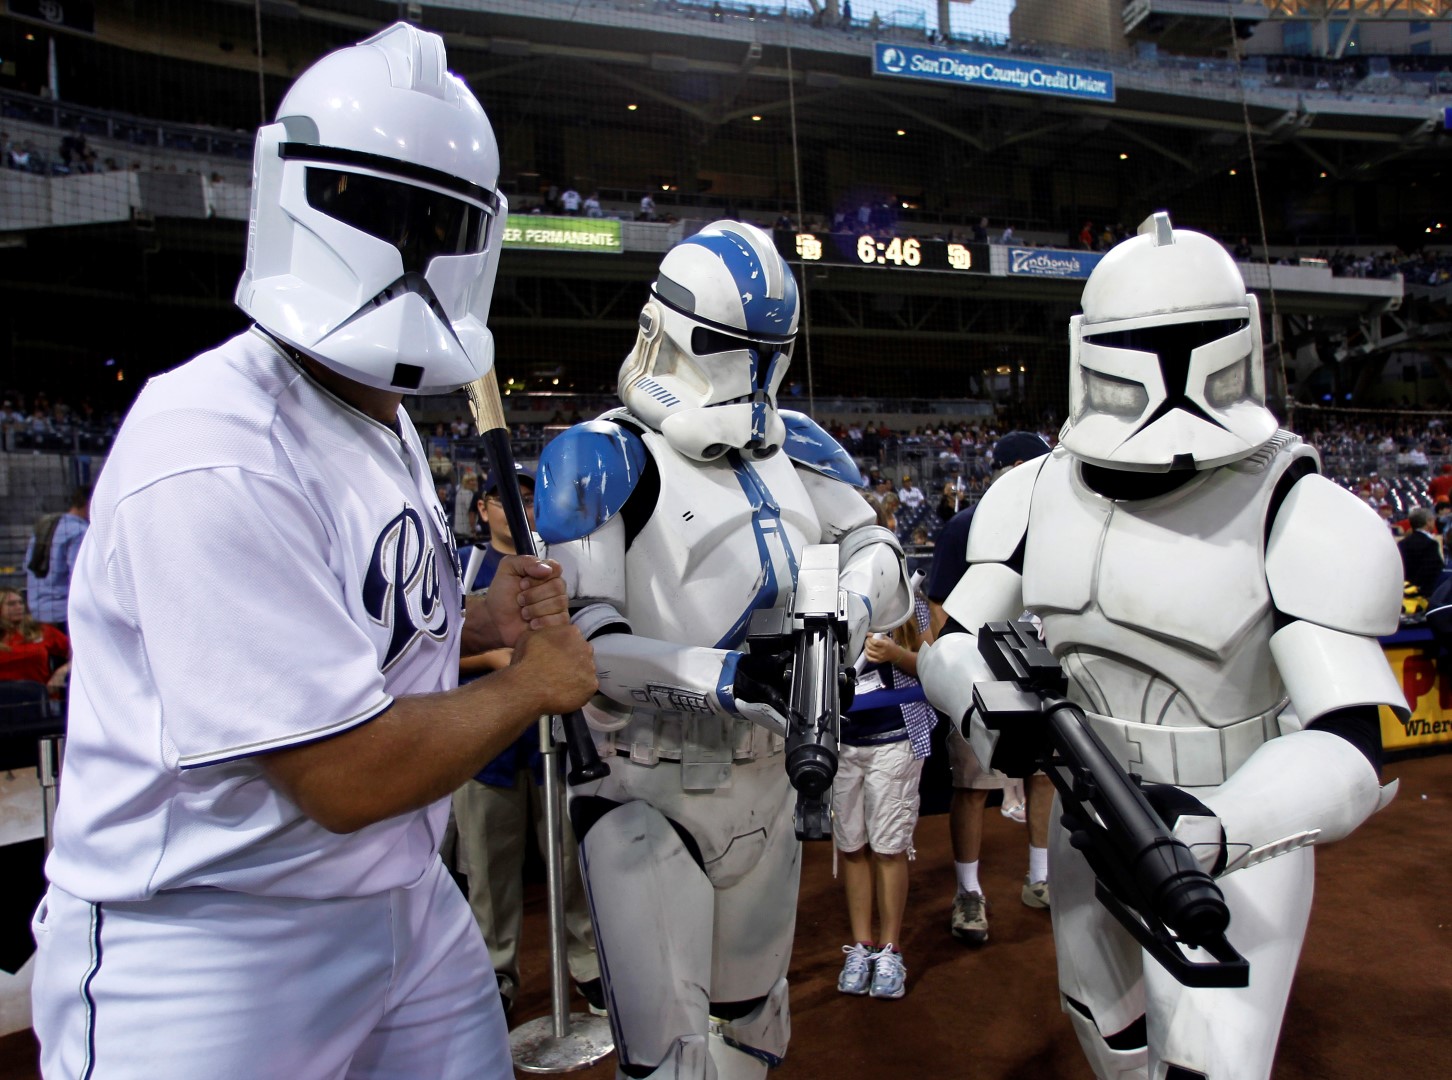 San Diego Padres relief pitcher Heath Bell (L) jokes around with Star Wars clone troopers during Star Wars night at the ball park prior to playing the Cincinnati Reds in their National League baseball game at Petco Park in San Diego, California September 24, 2010. REUTERS/Mike Blake (UNITED STATES - Tags: SPORT BASEBALL ENTERTAINMENT) - RTXSMJQ